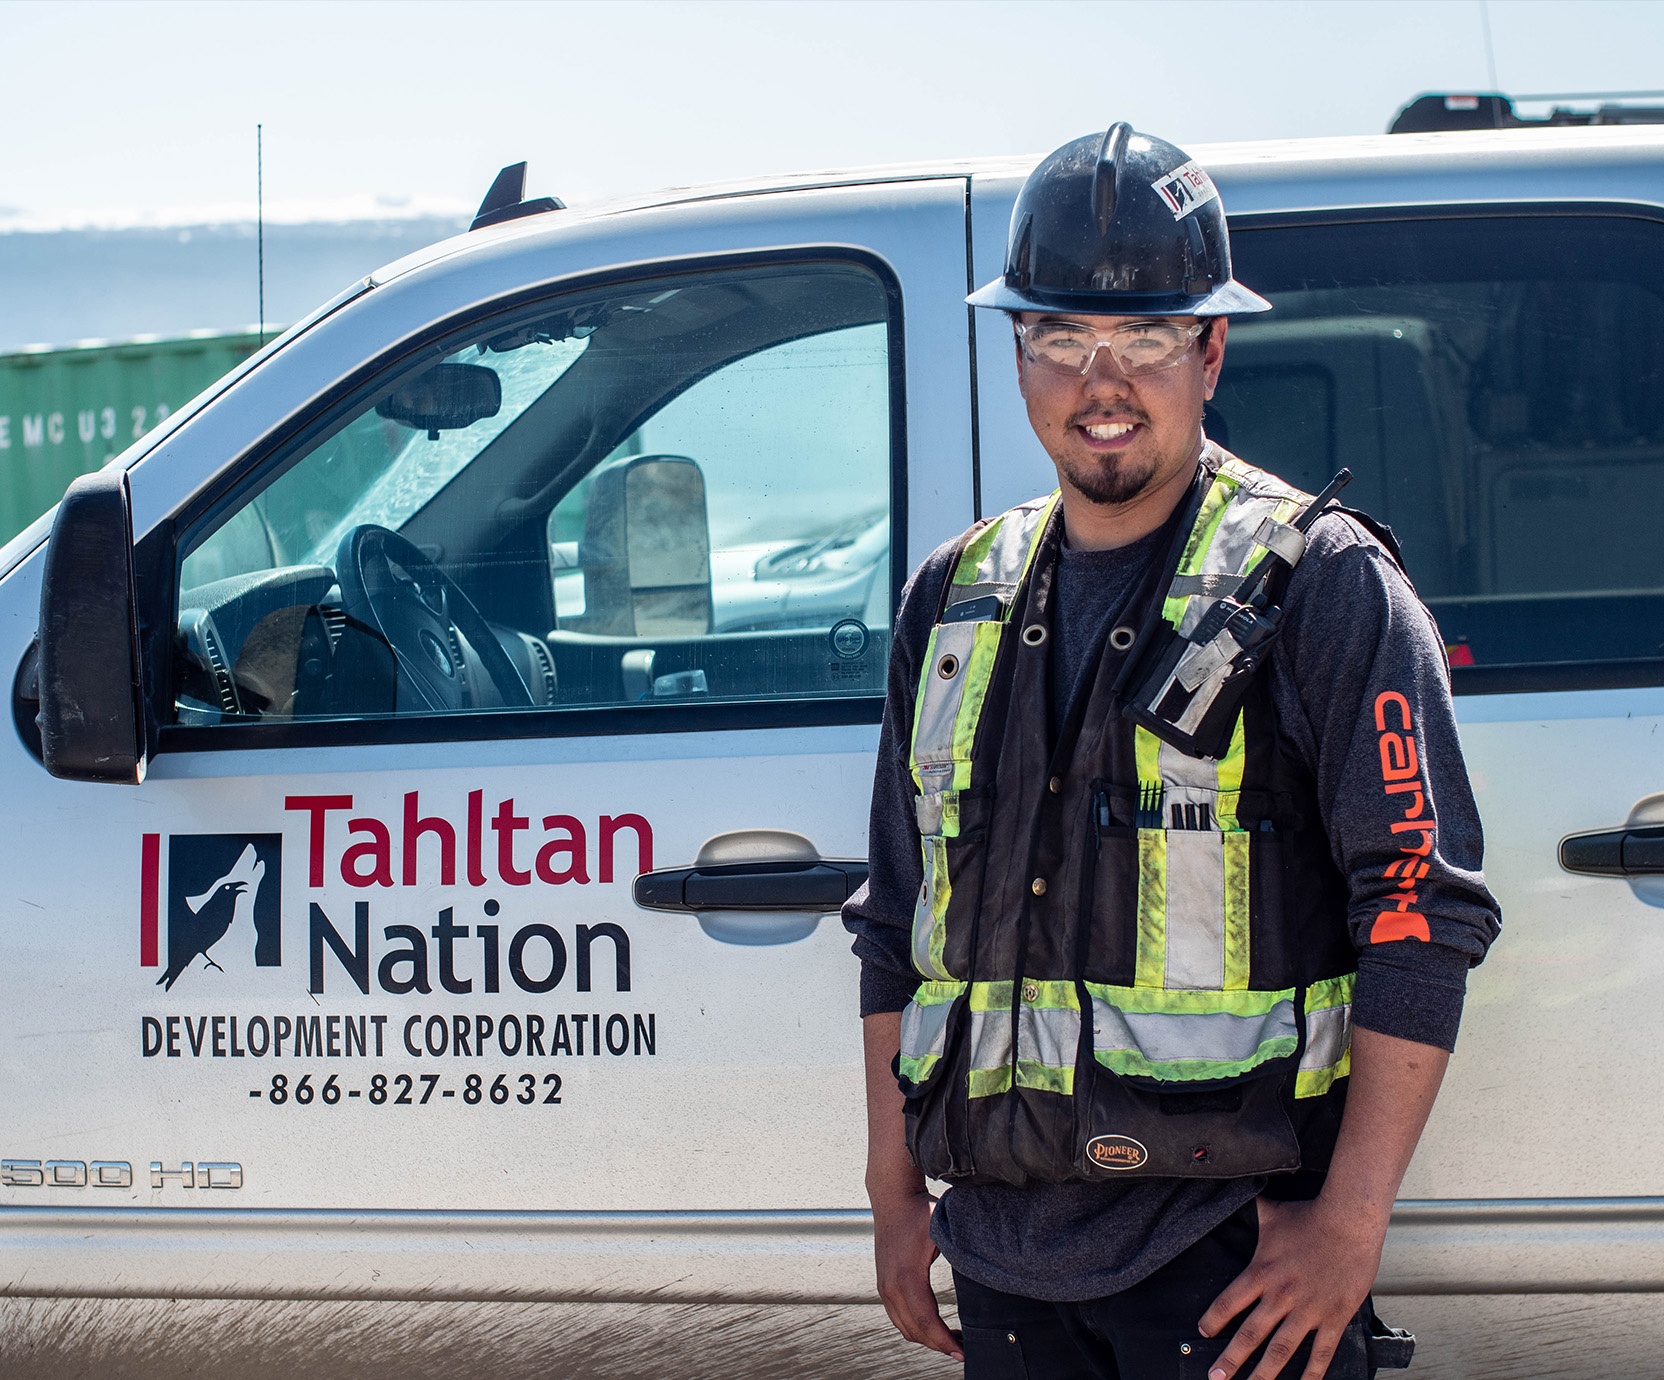 Red Chris employee and Tahltan vehicle